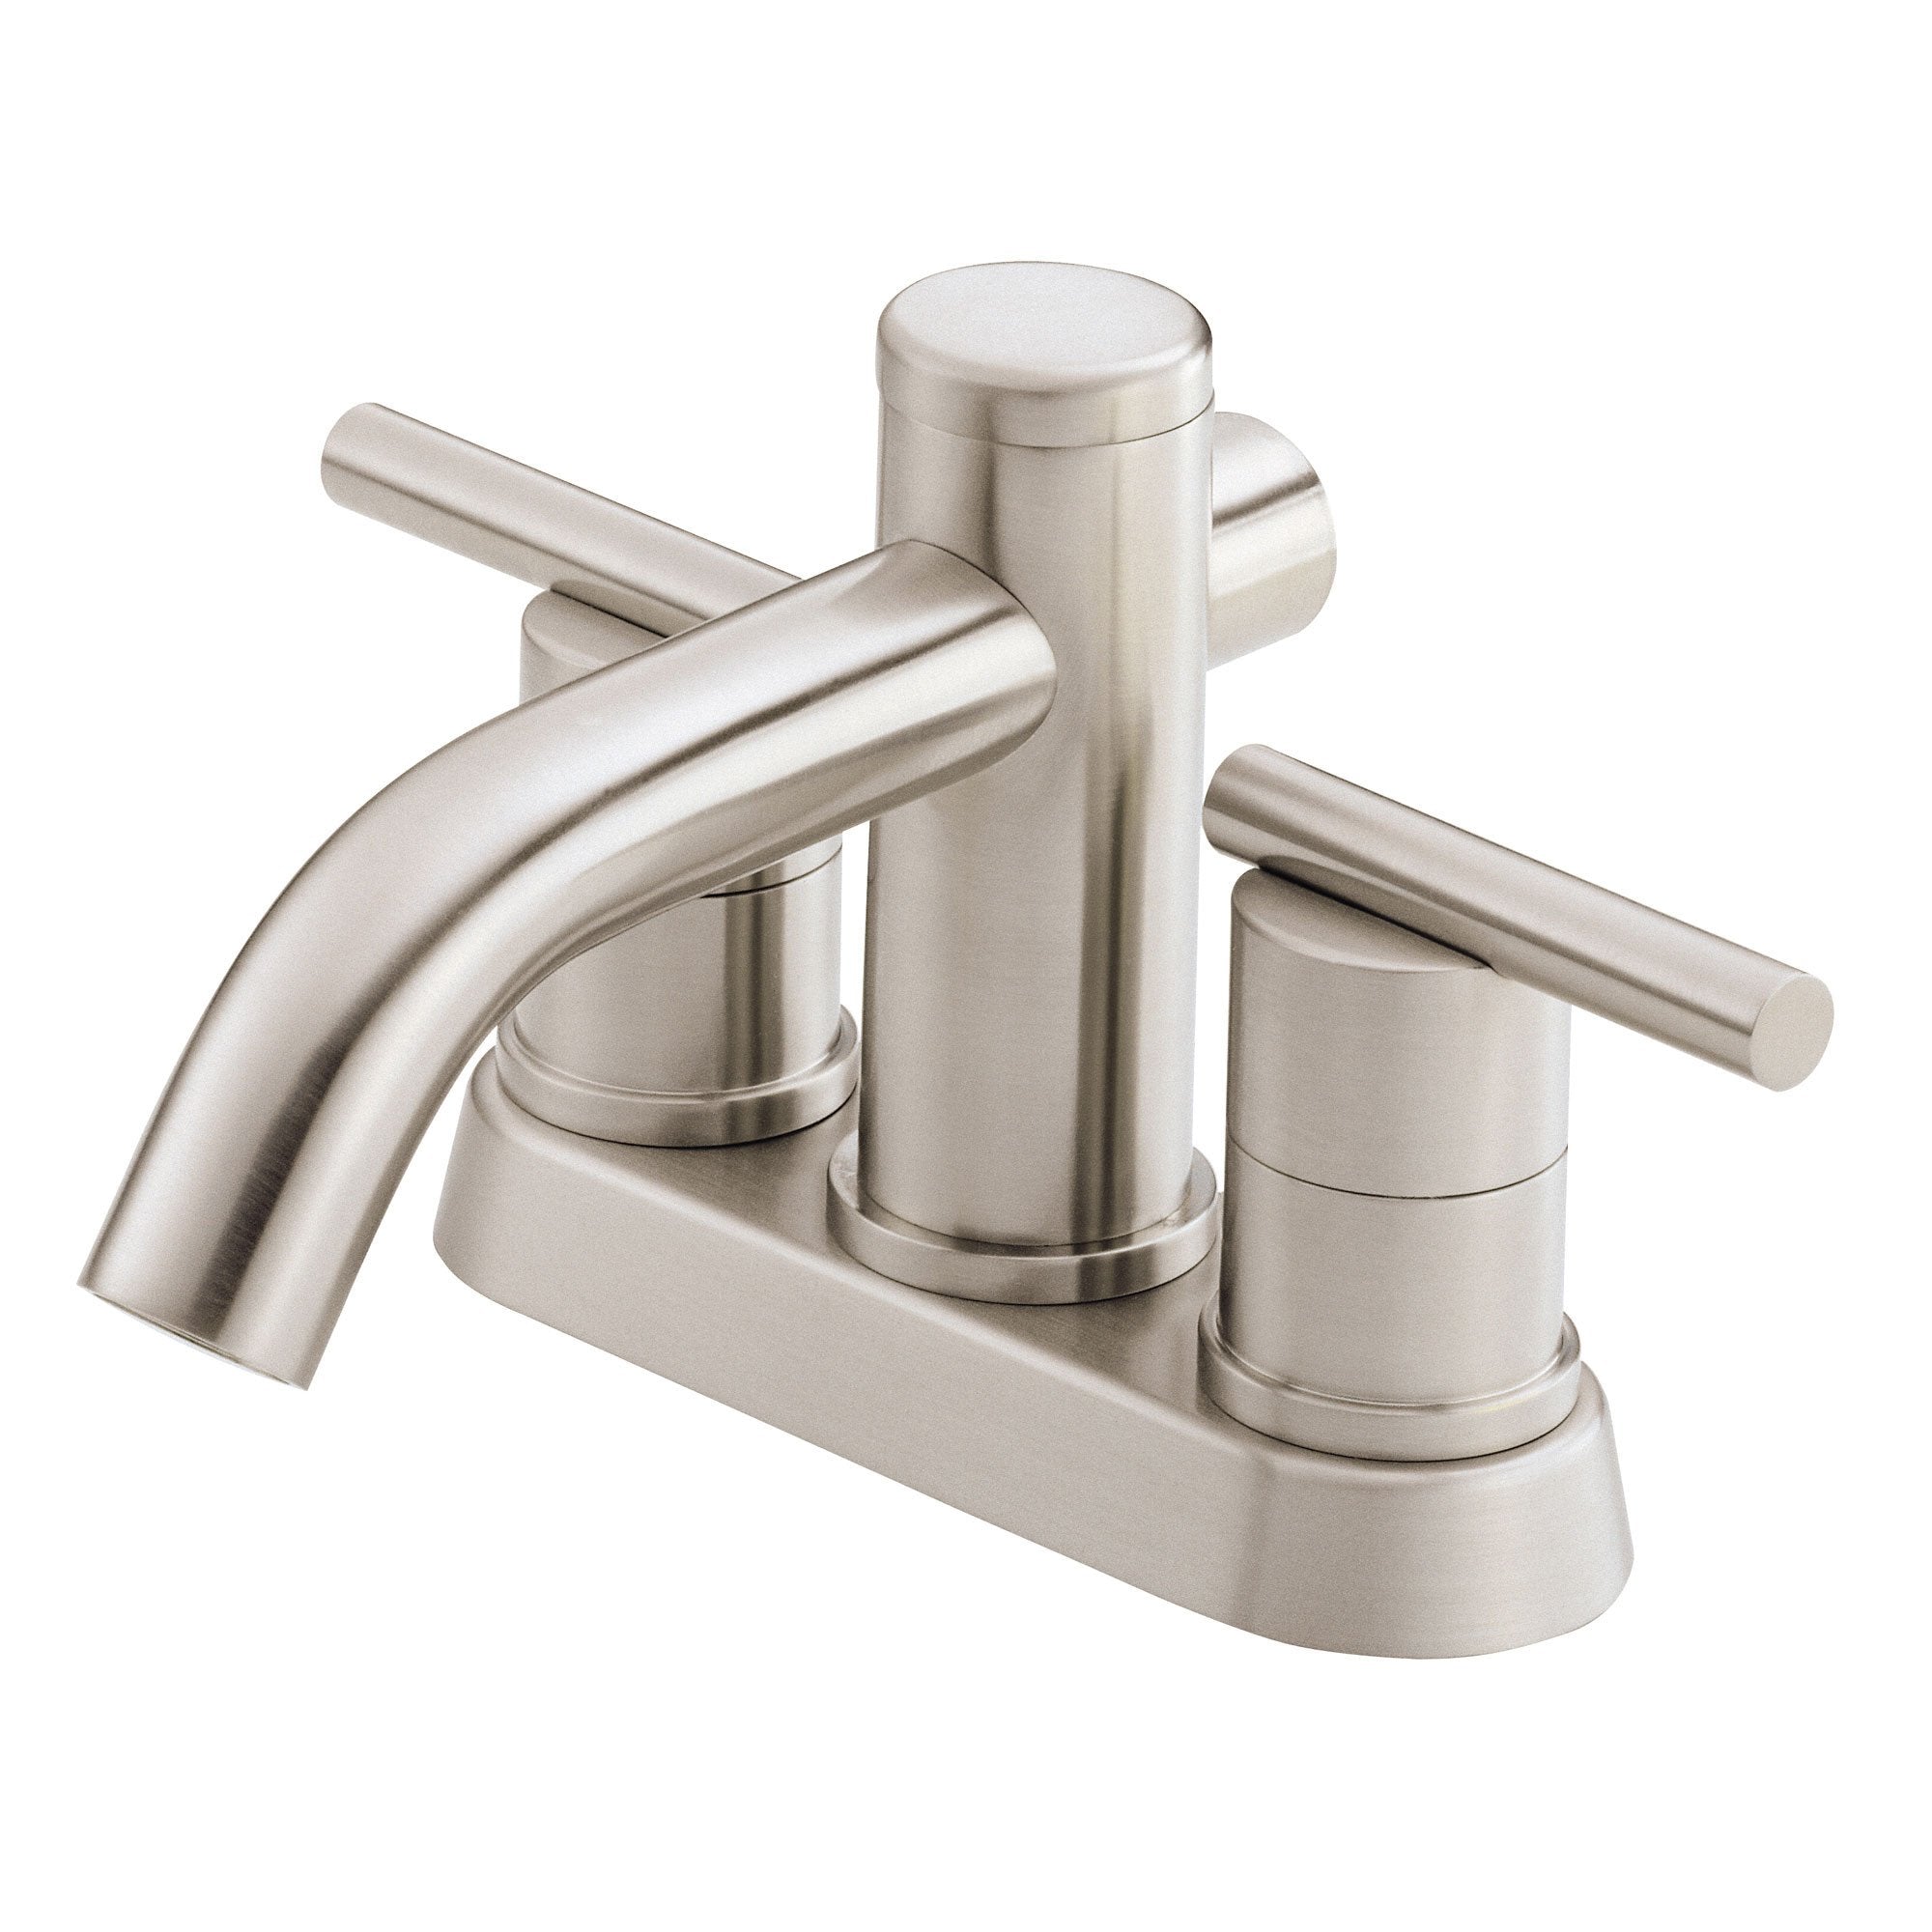 Danze Parma Brushed Nickel 2 Cylindrical Handle Centerset Bathroom Sink Faucet